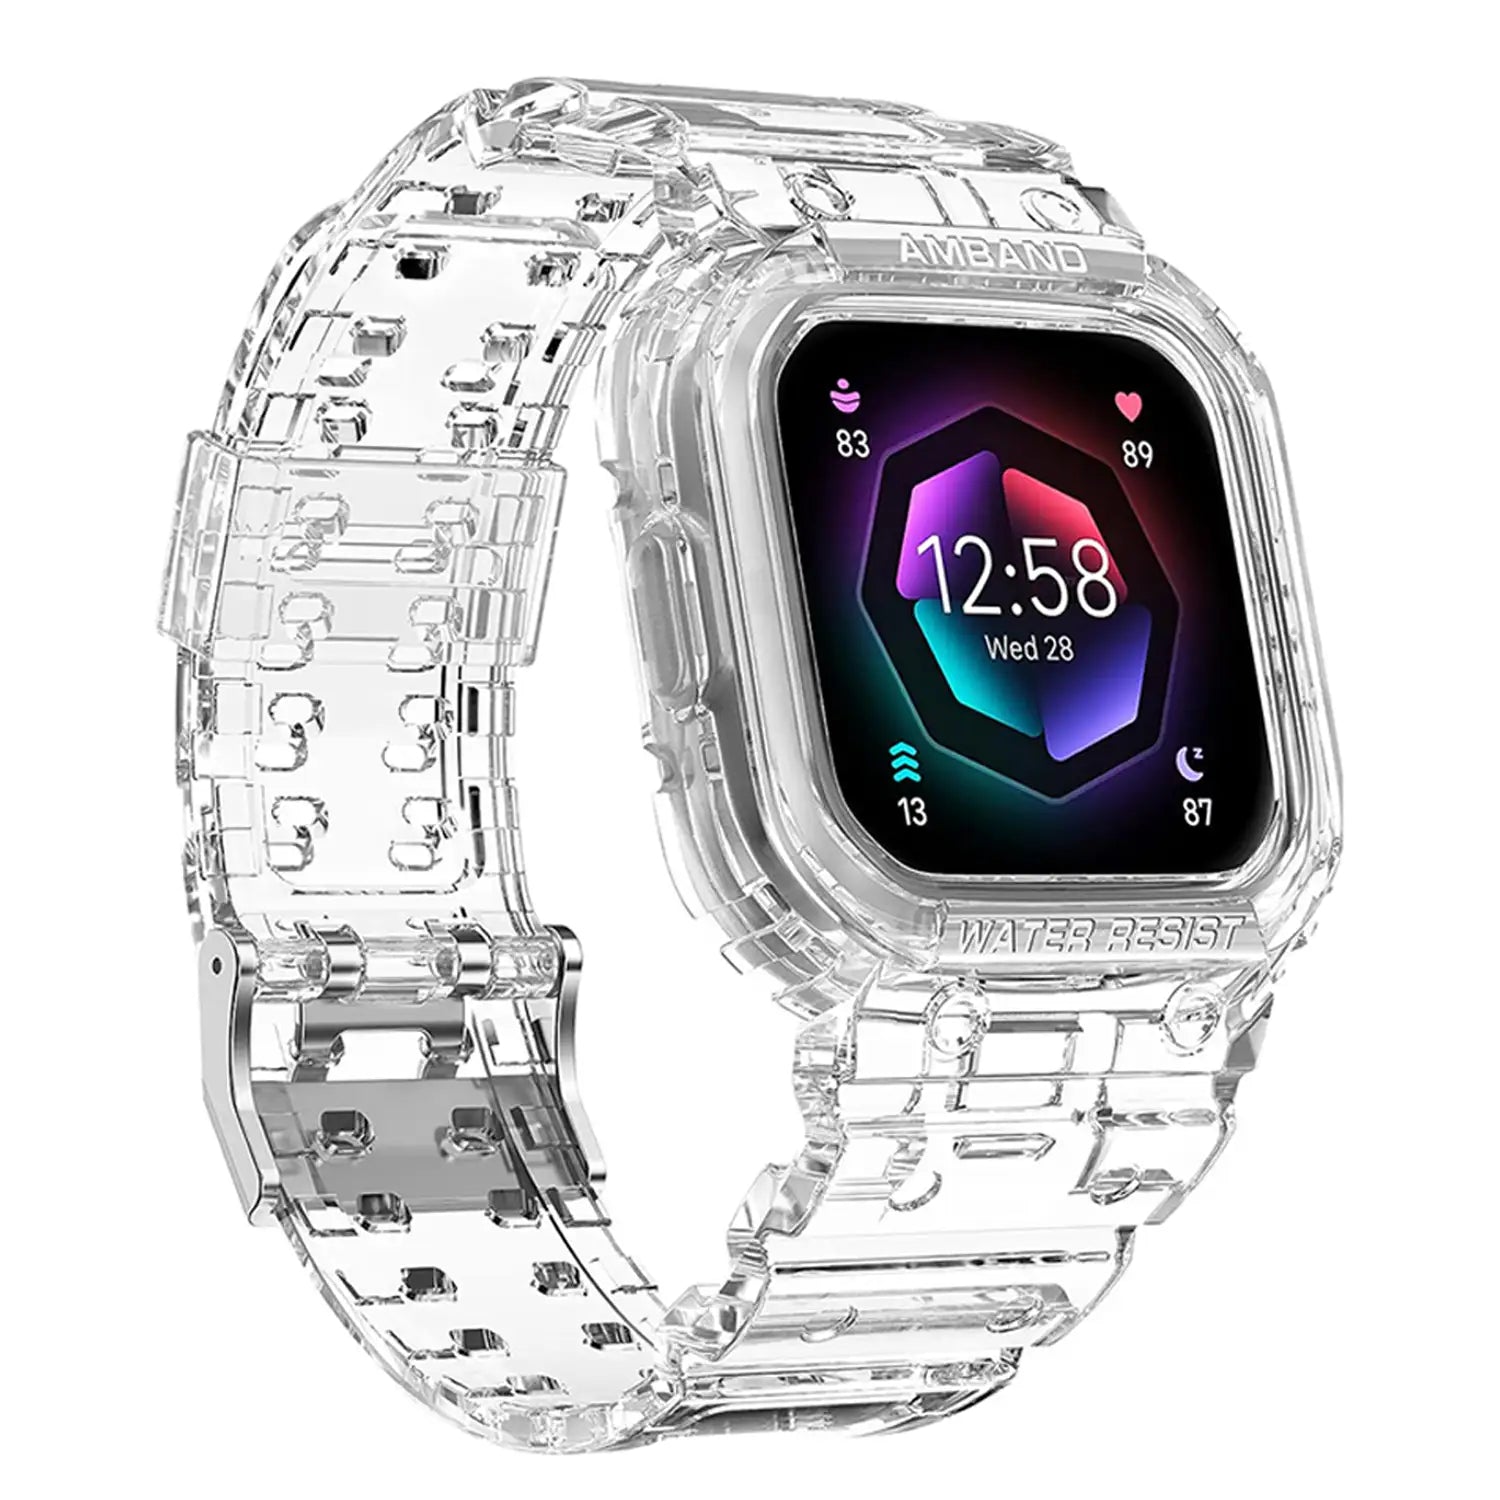 amBand FitBit Series Case with Band for Fitbit Versa 4/3/2/1/Lite/Sense, Clear